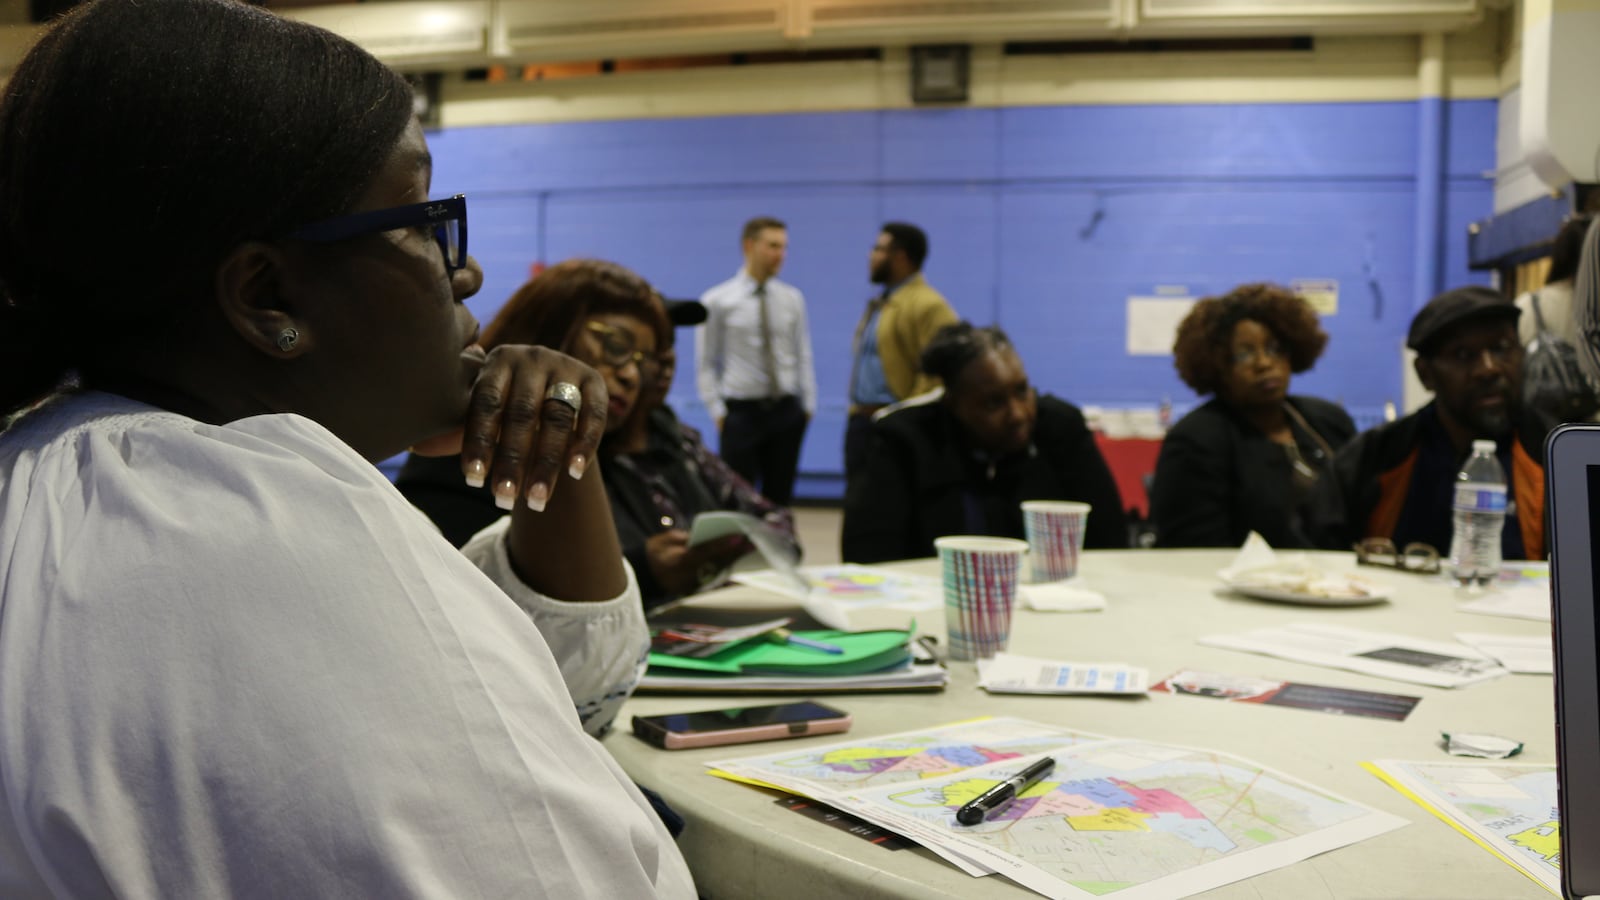 Community members gathered in Gowanus to learn about a proposed elementary school rezoning that could help relieve overcrowding and integrate District 15 schools.